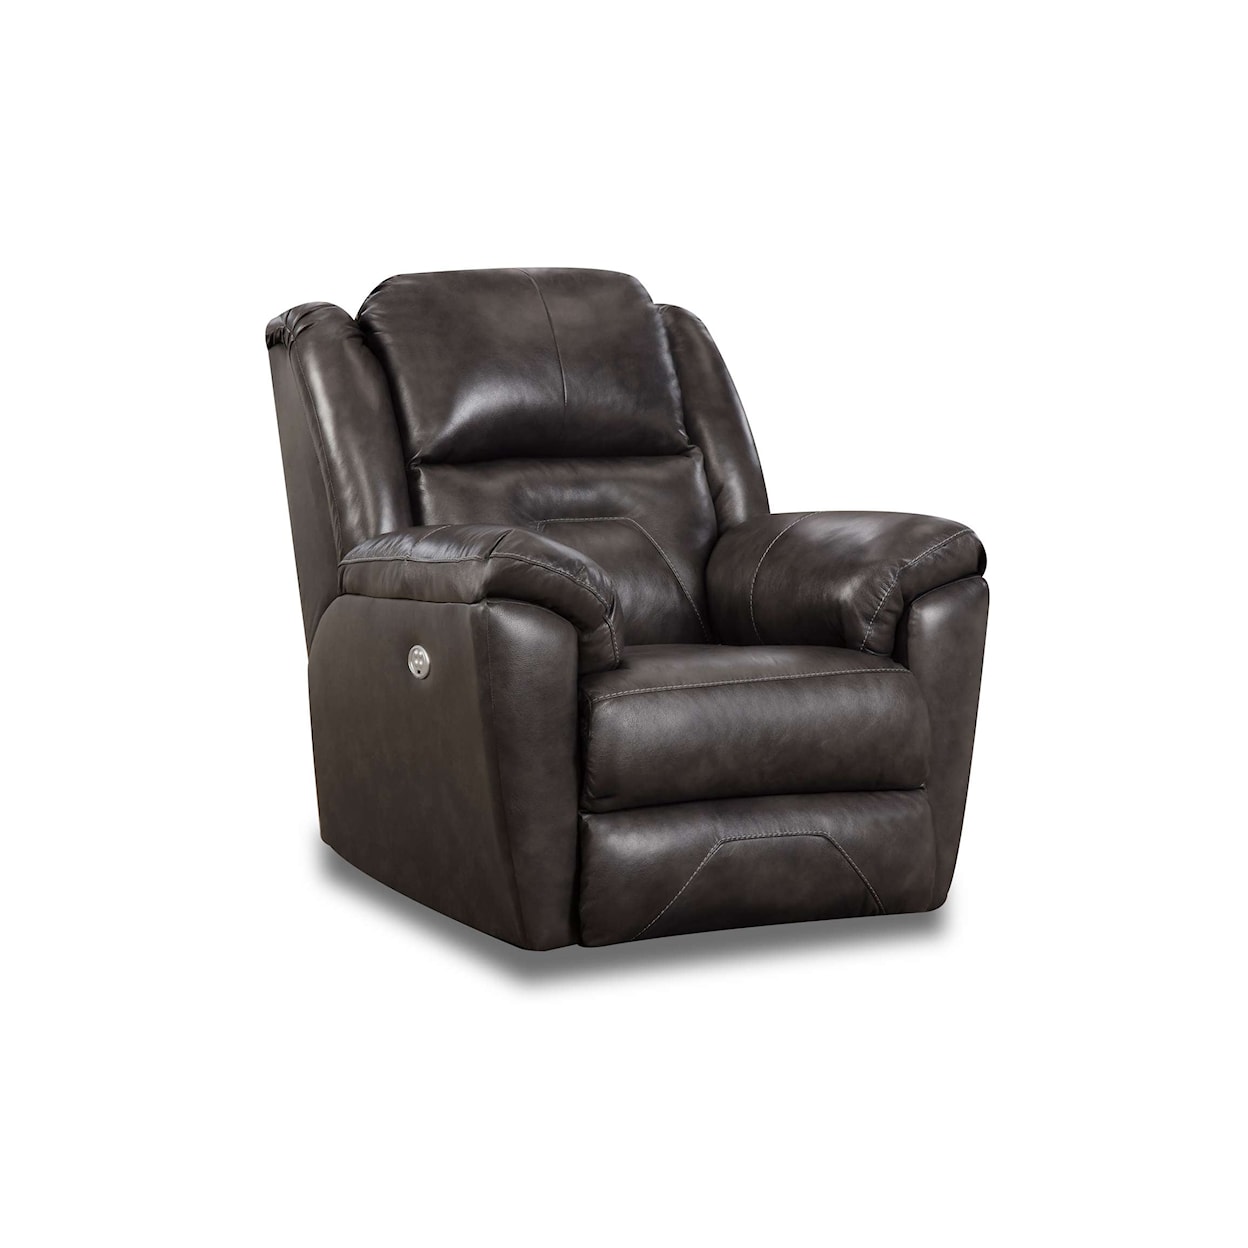 Powell's Motion Southern Motion Pandora Wall Recliner with Power Headrest